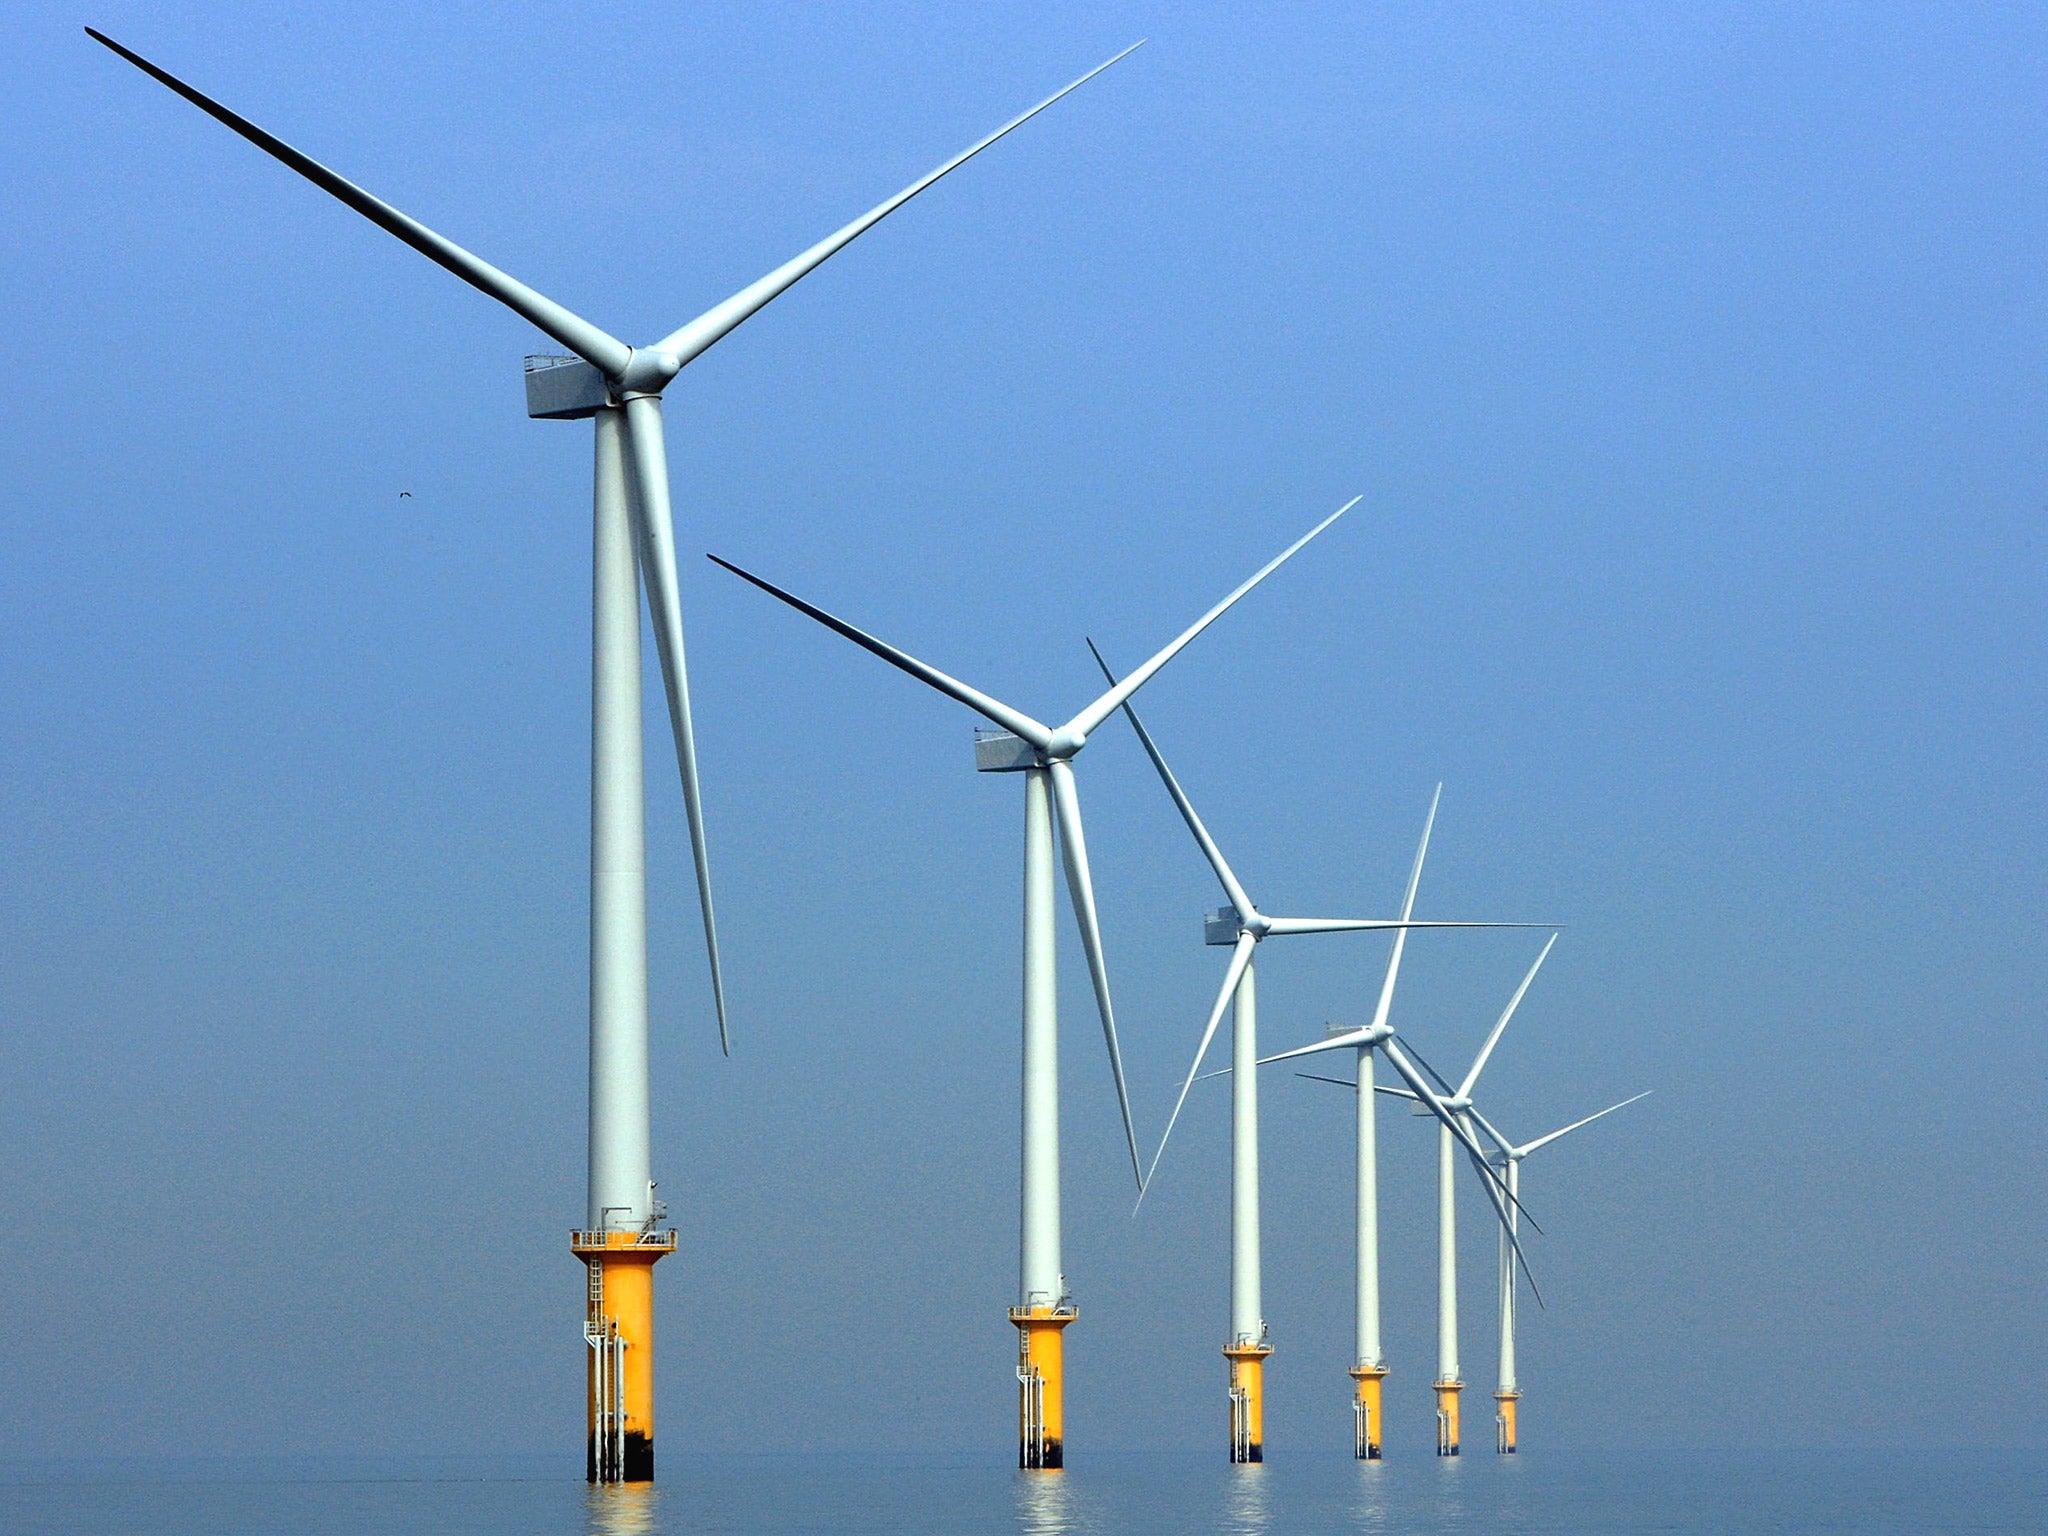 The Burbo Bank off shore wind farm in Liverpool bay. More than half the public believe the UK should commit to most of its electricity coming from renewable sources by 2030